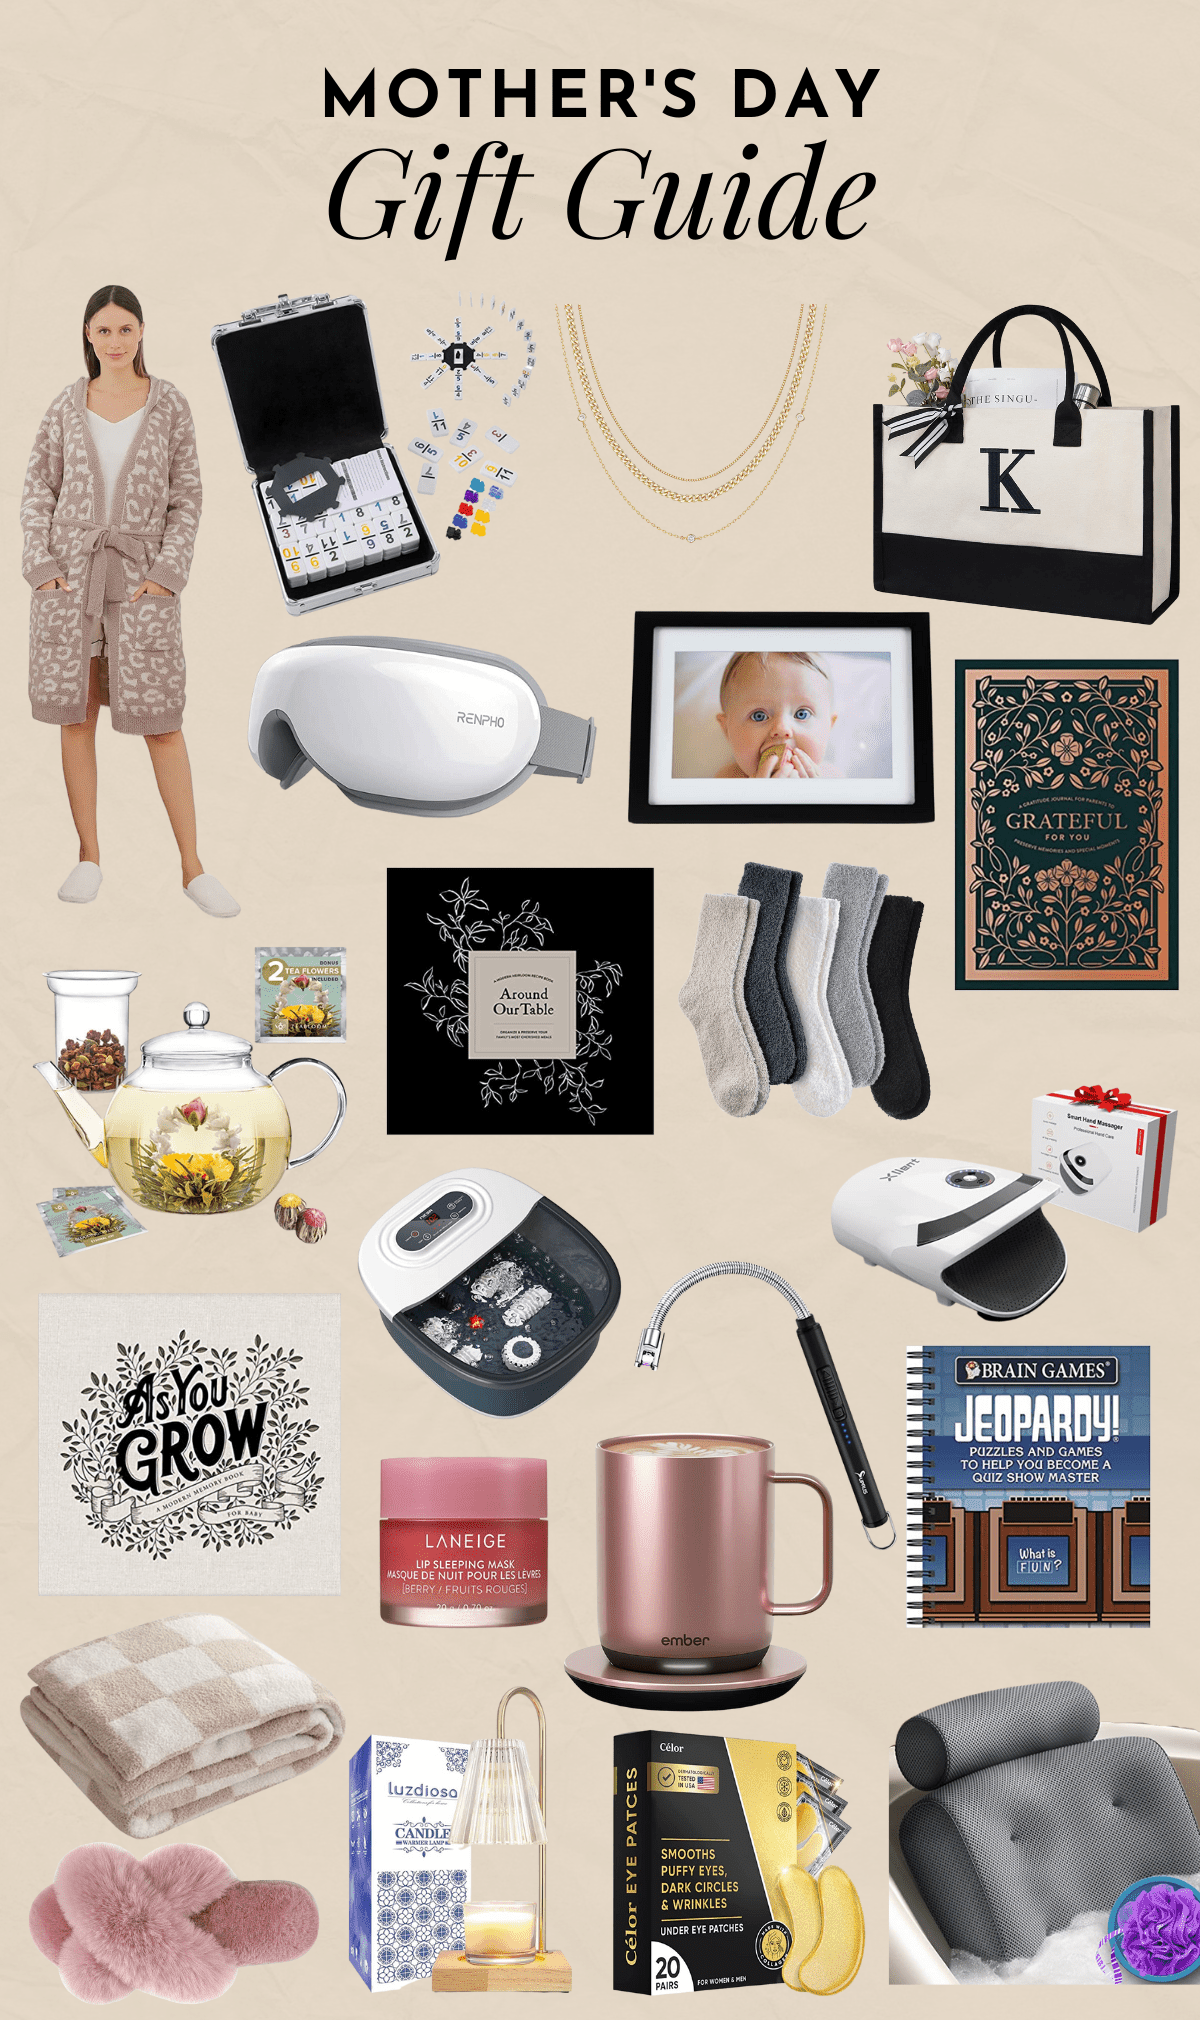 2023 Mother's Day gift guide helps you celebrate moms in style